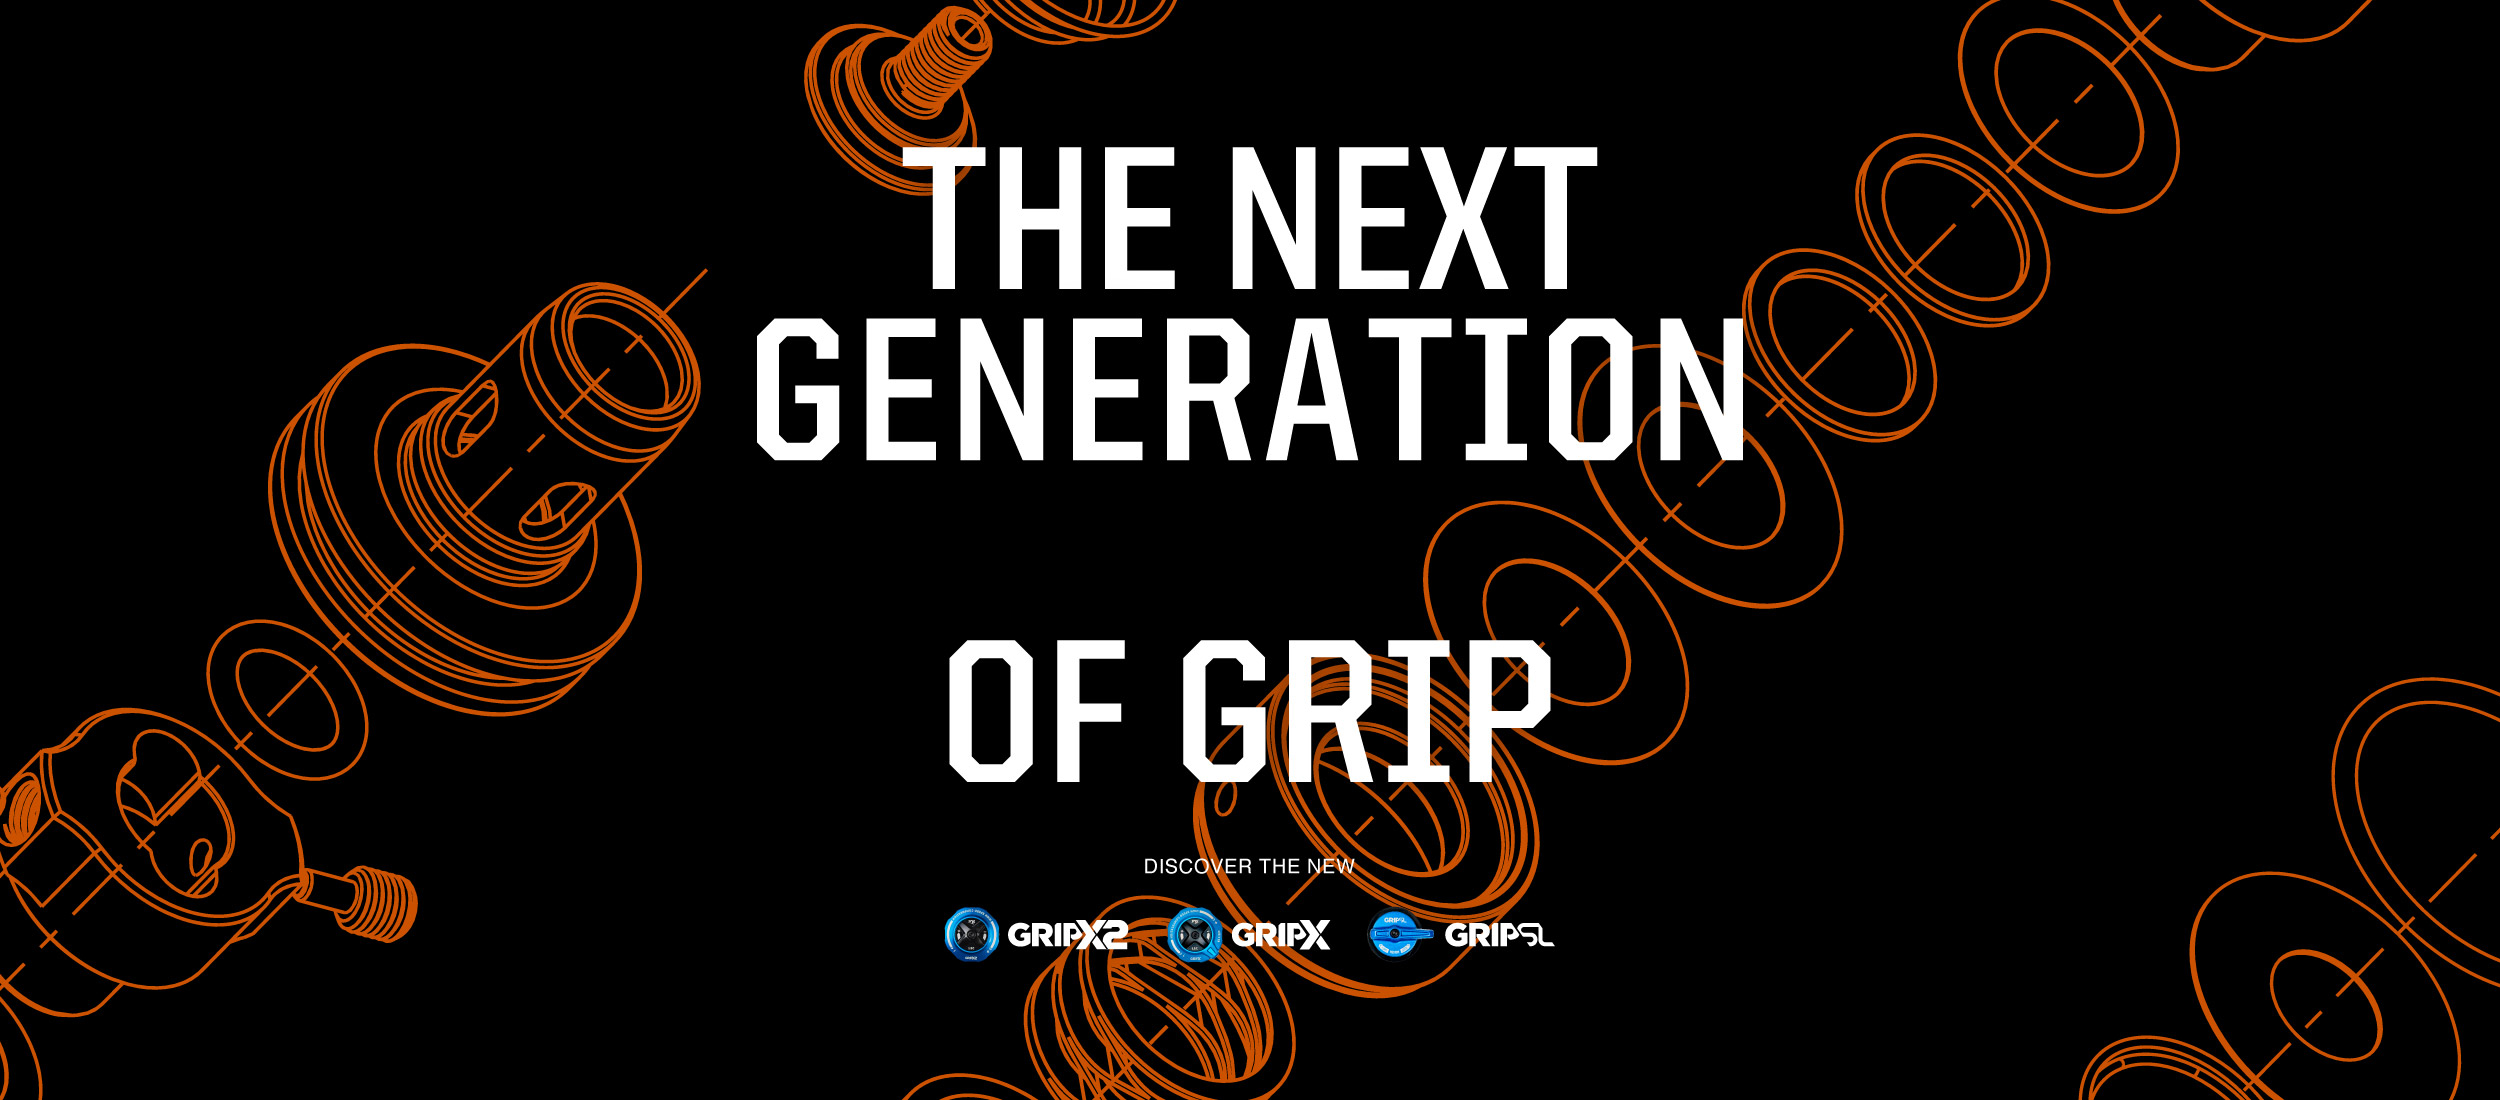 The next generation of GRIP